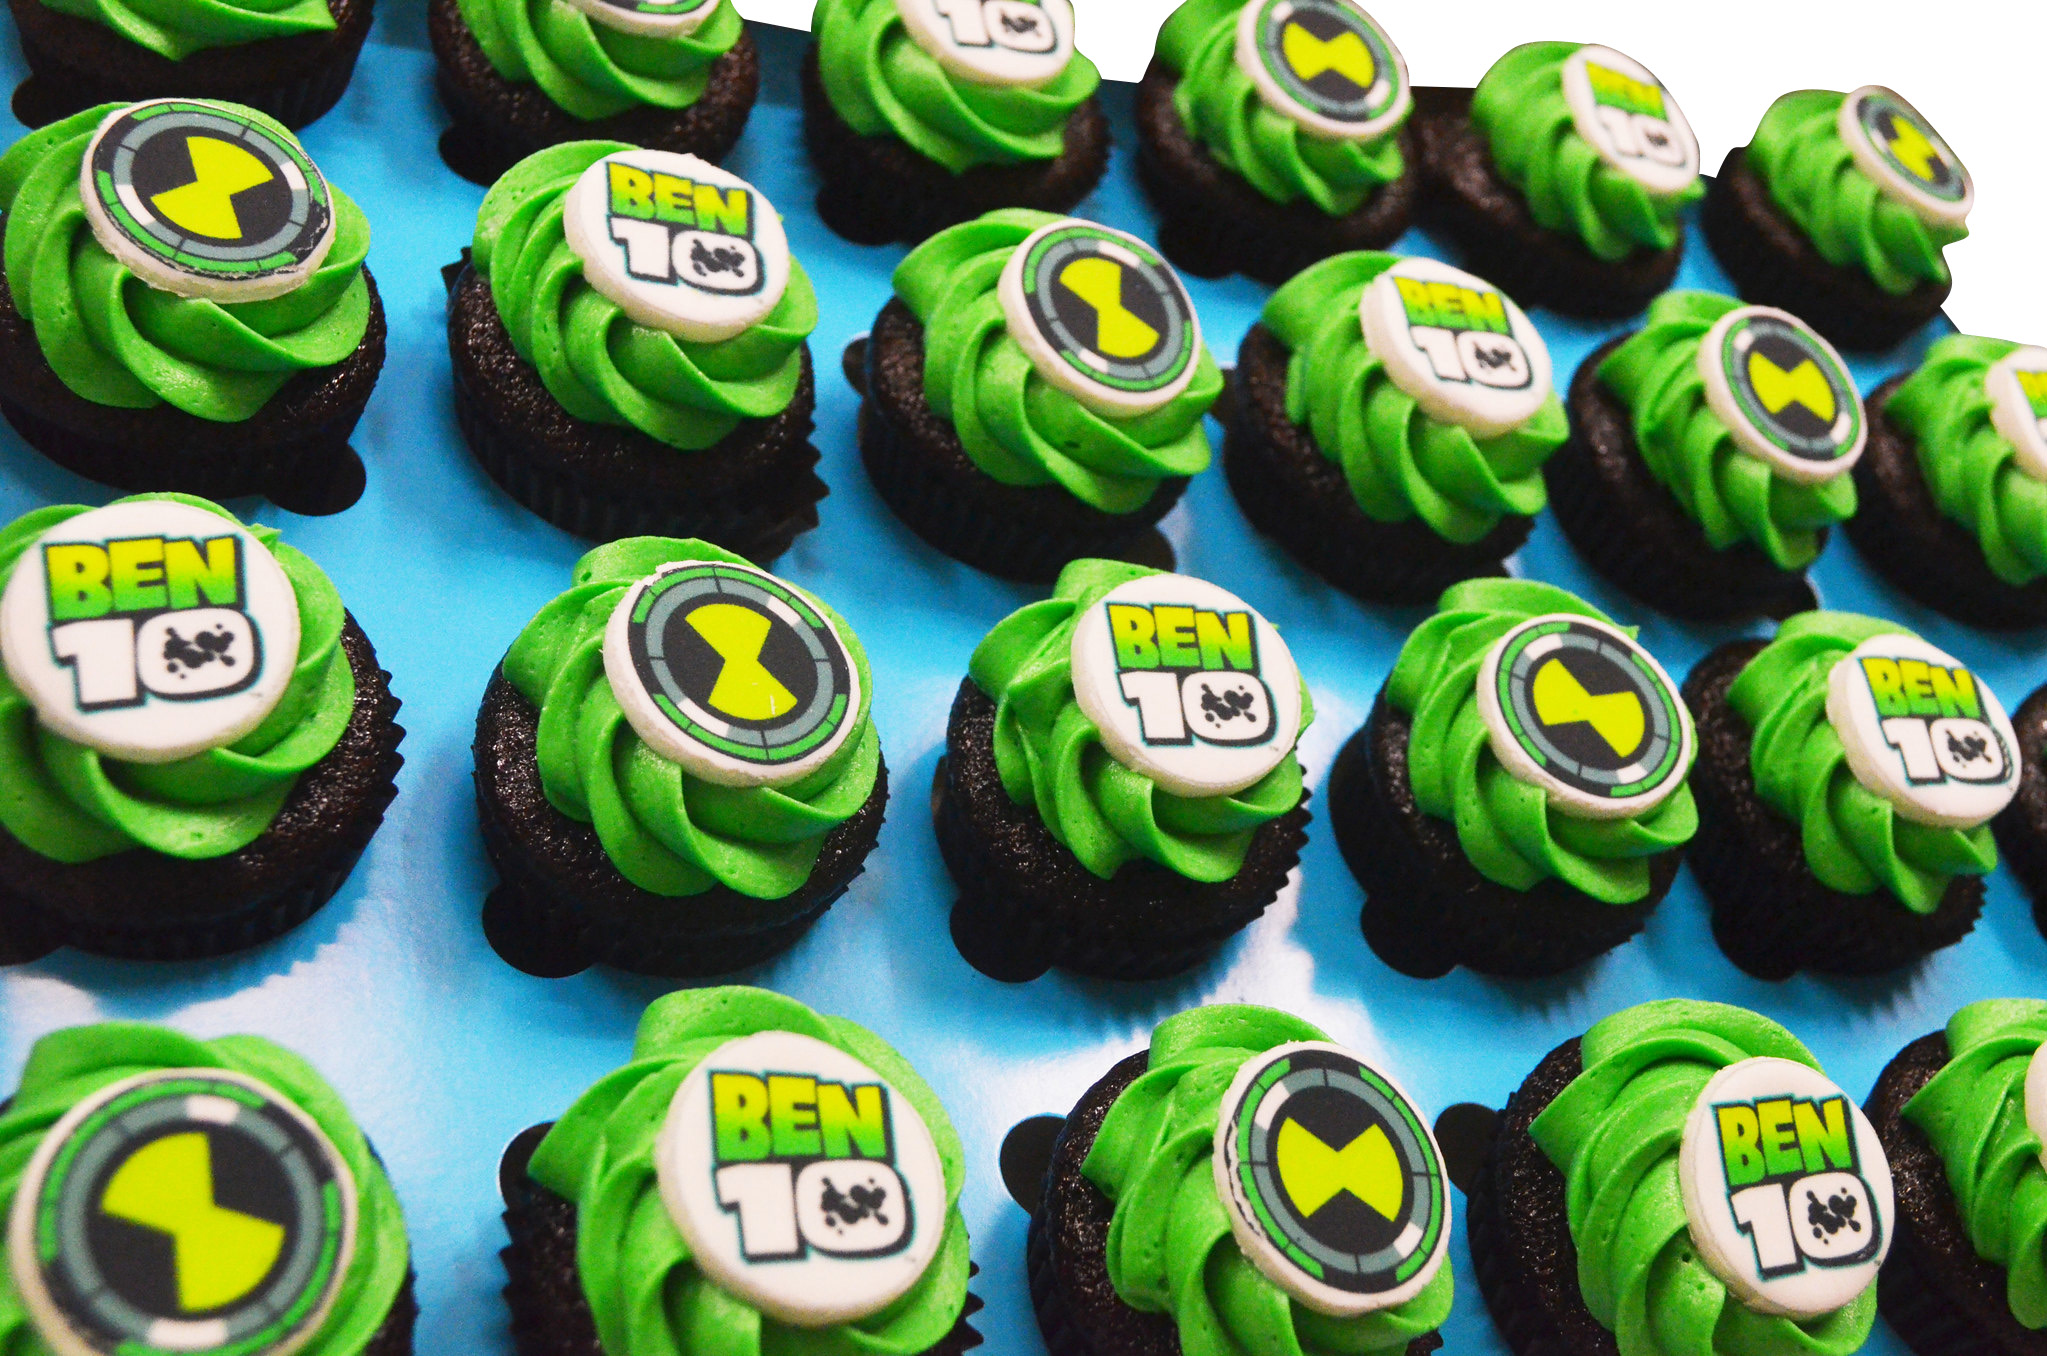 Ben 10 Theme Cupcakes - Pack of 6